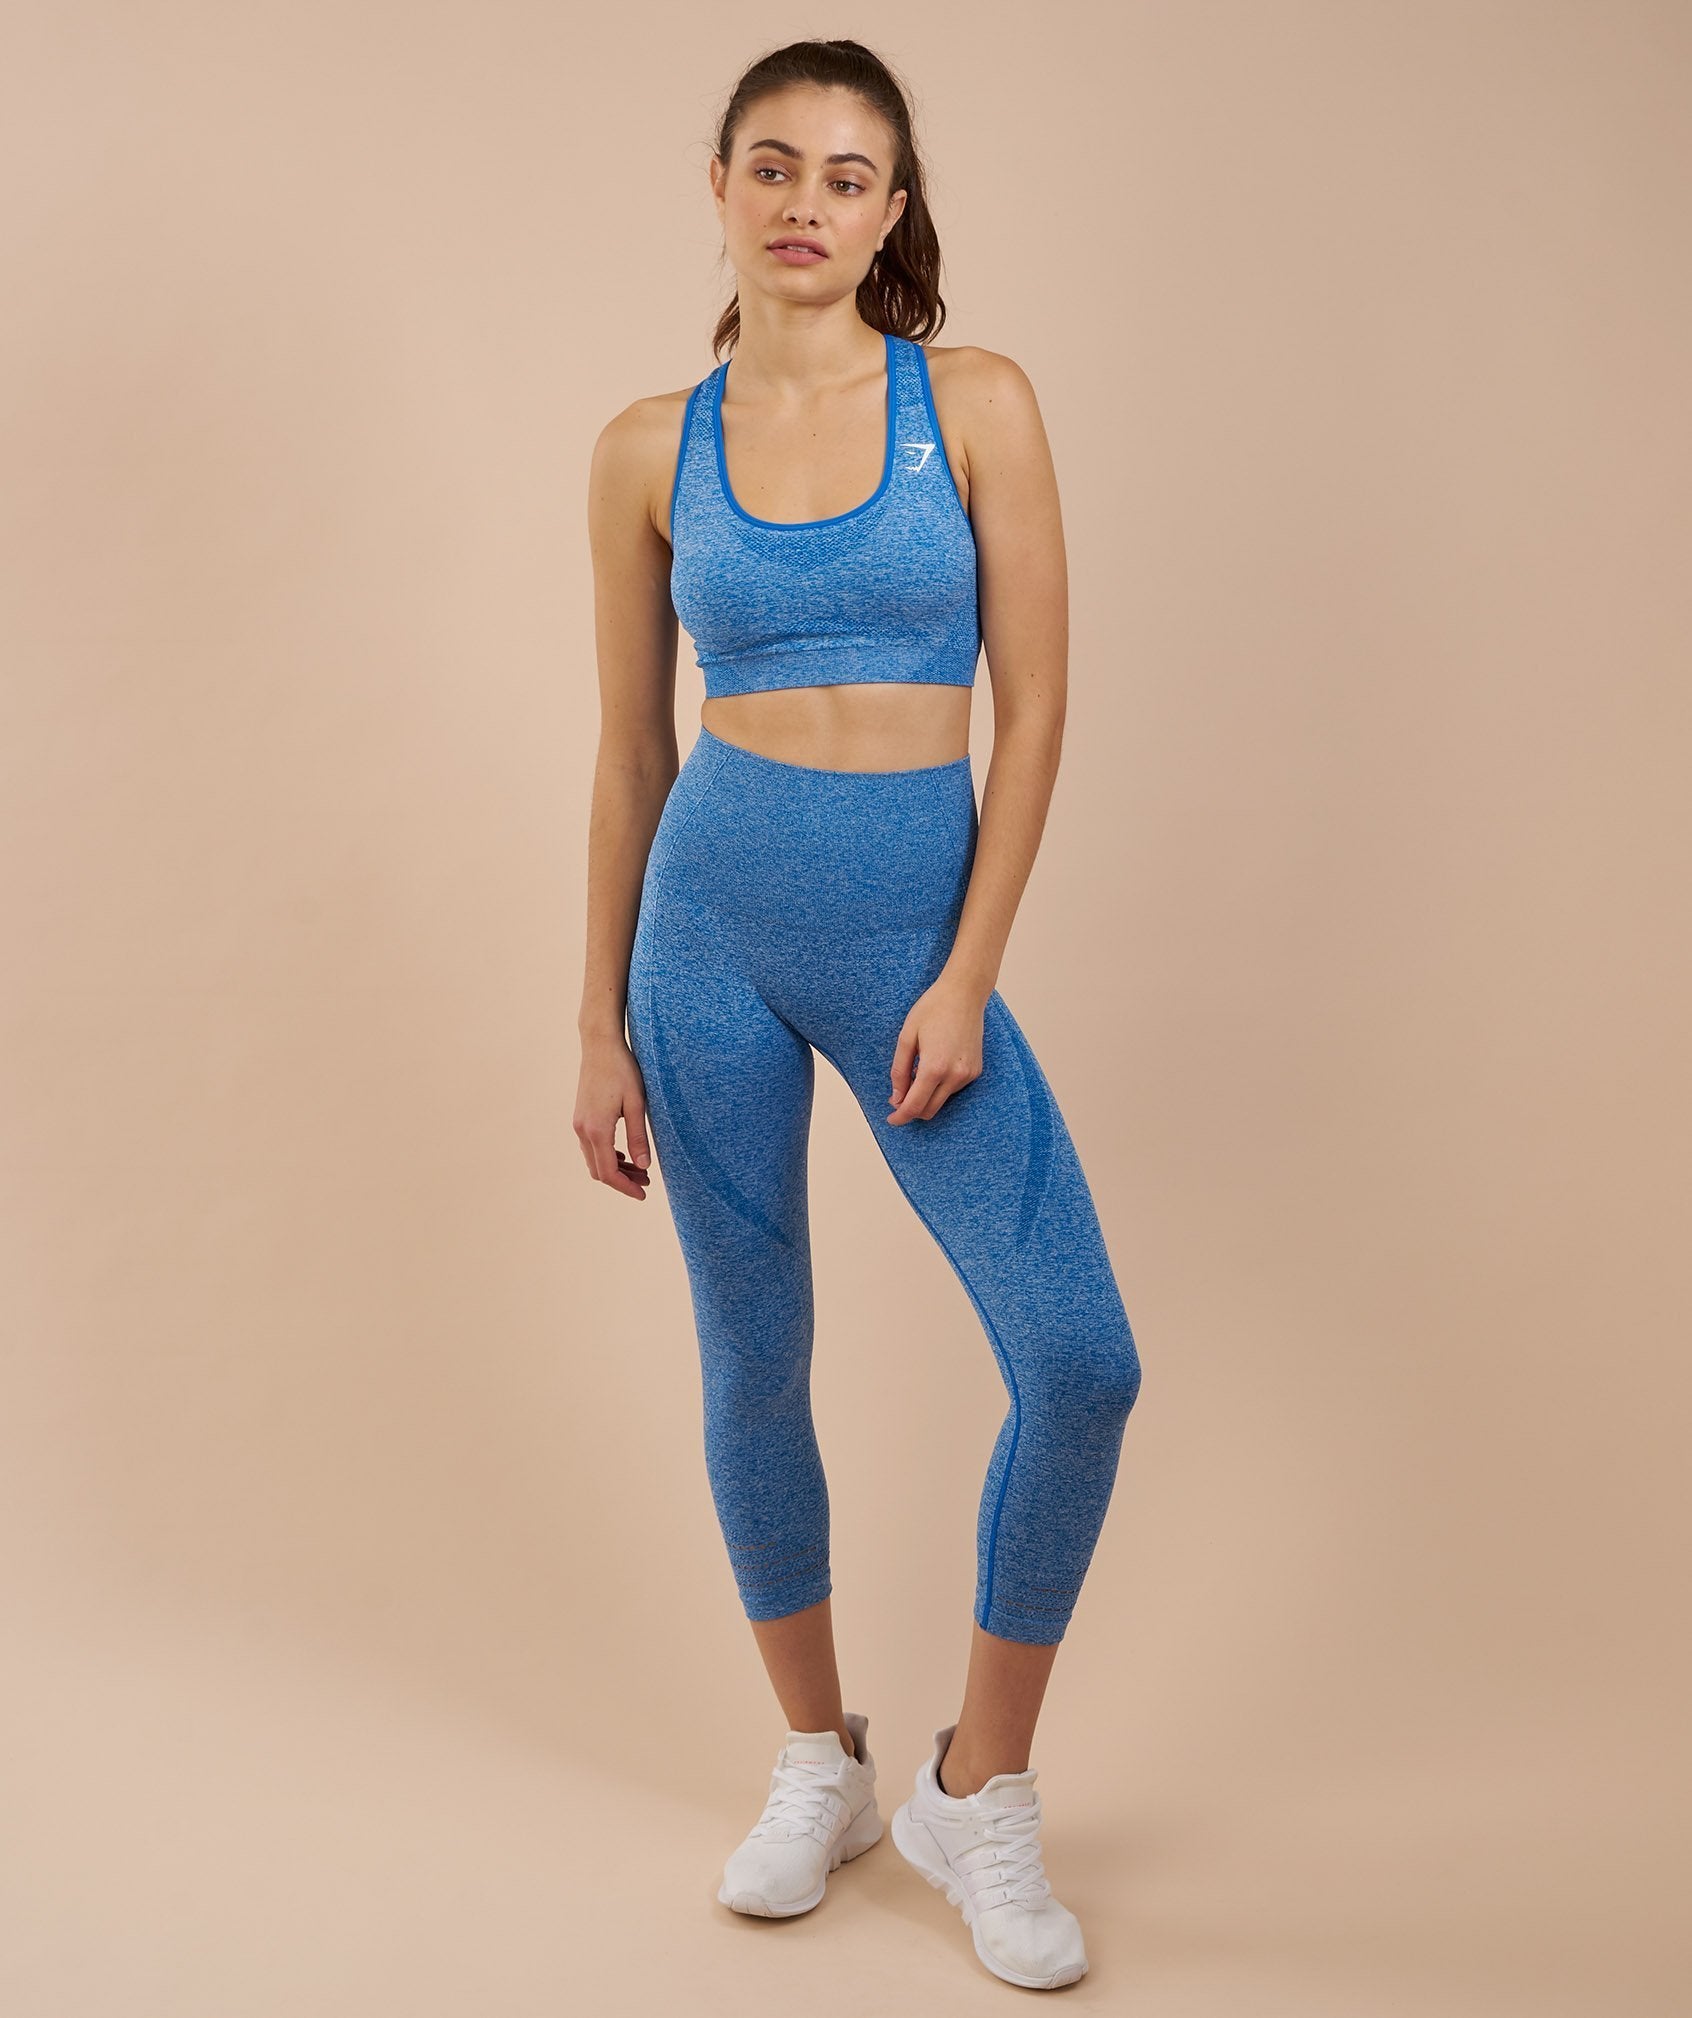 Seamless Sports Bra in Blueberry Marl - view 5